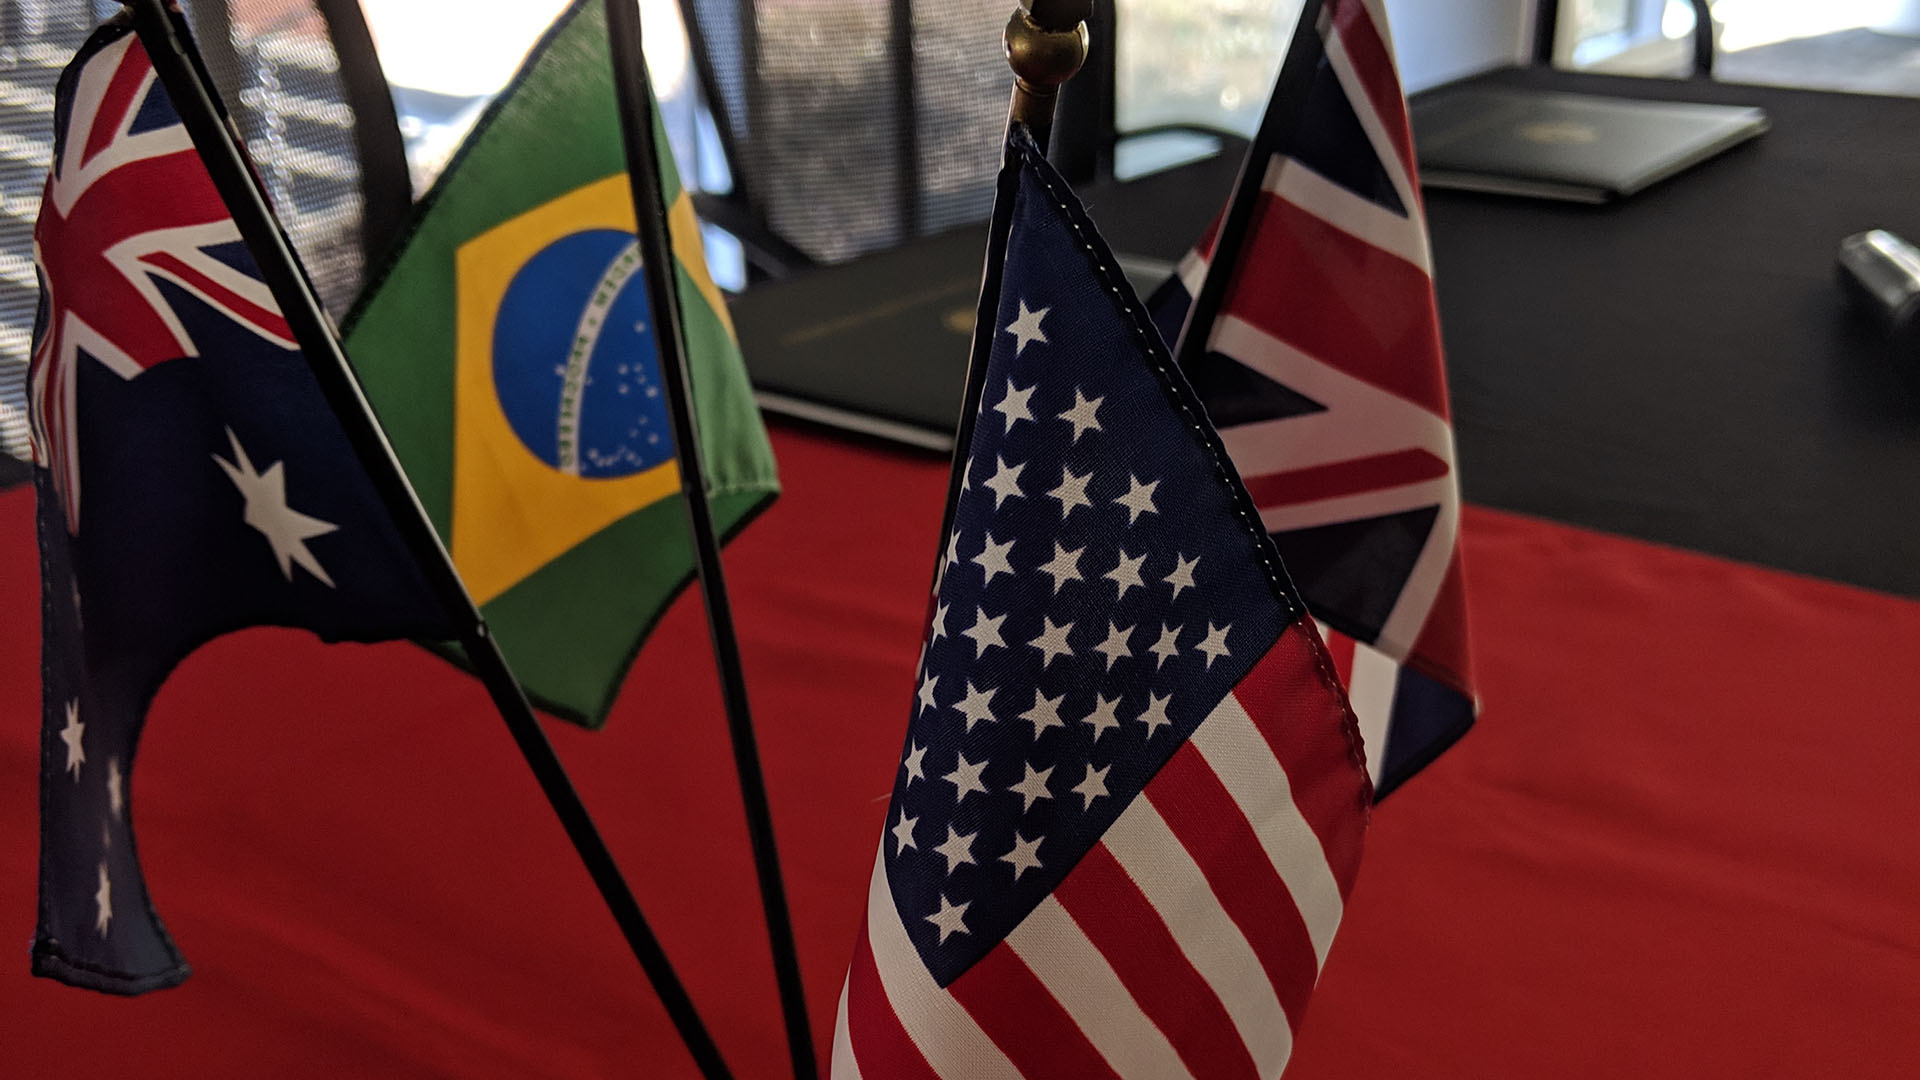 Image from 2019 UGPN conference of Australian, Brazilian, UK and USA flags on a deskflags